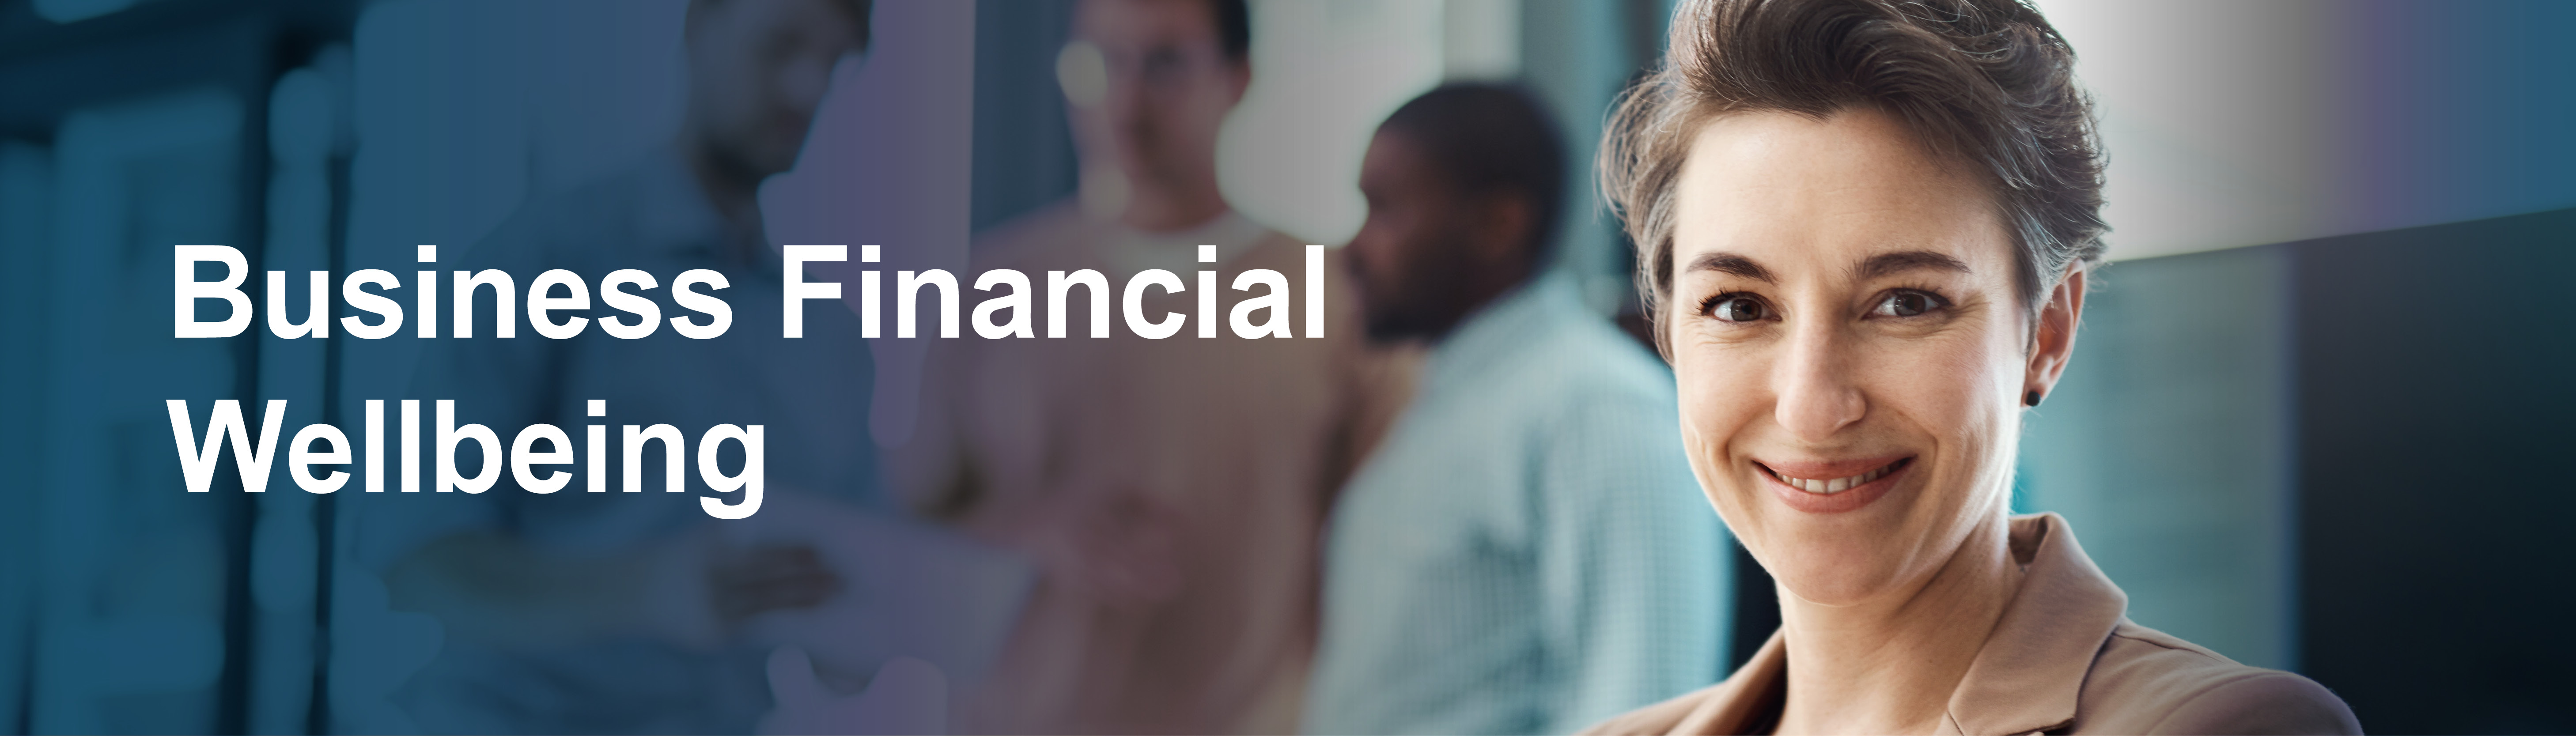 Business Financial Wellbeing. A woman smiling with her colleagues in the background.